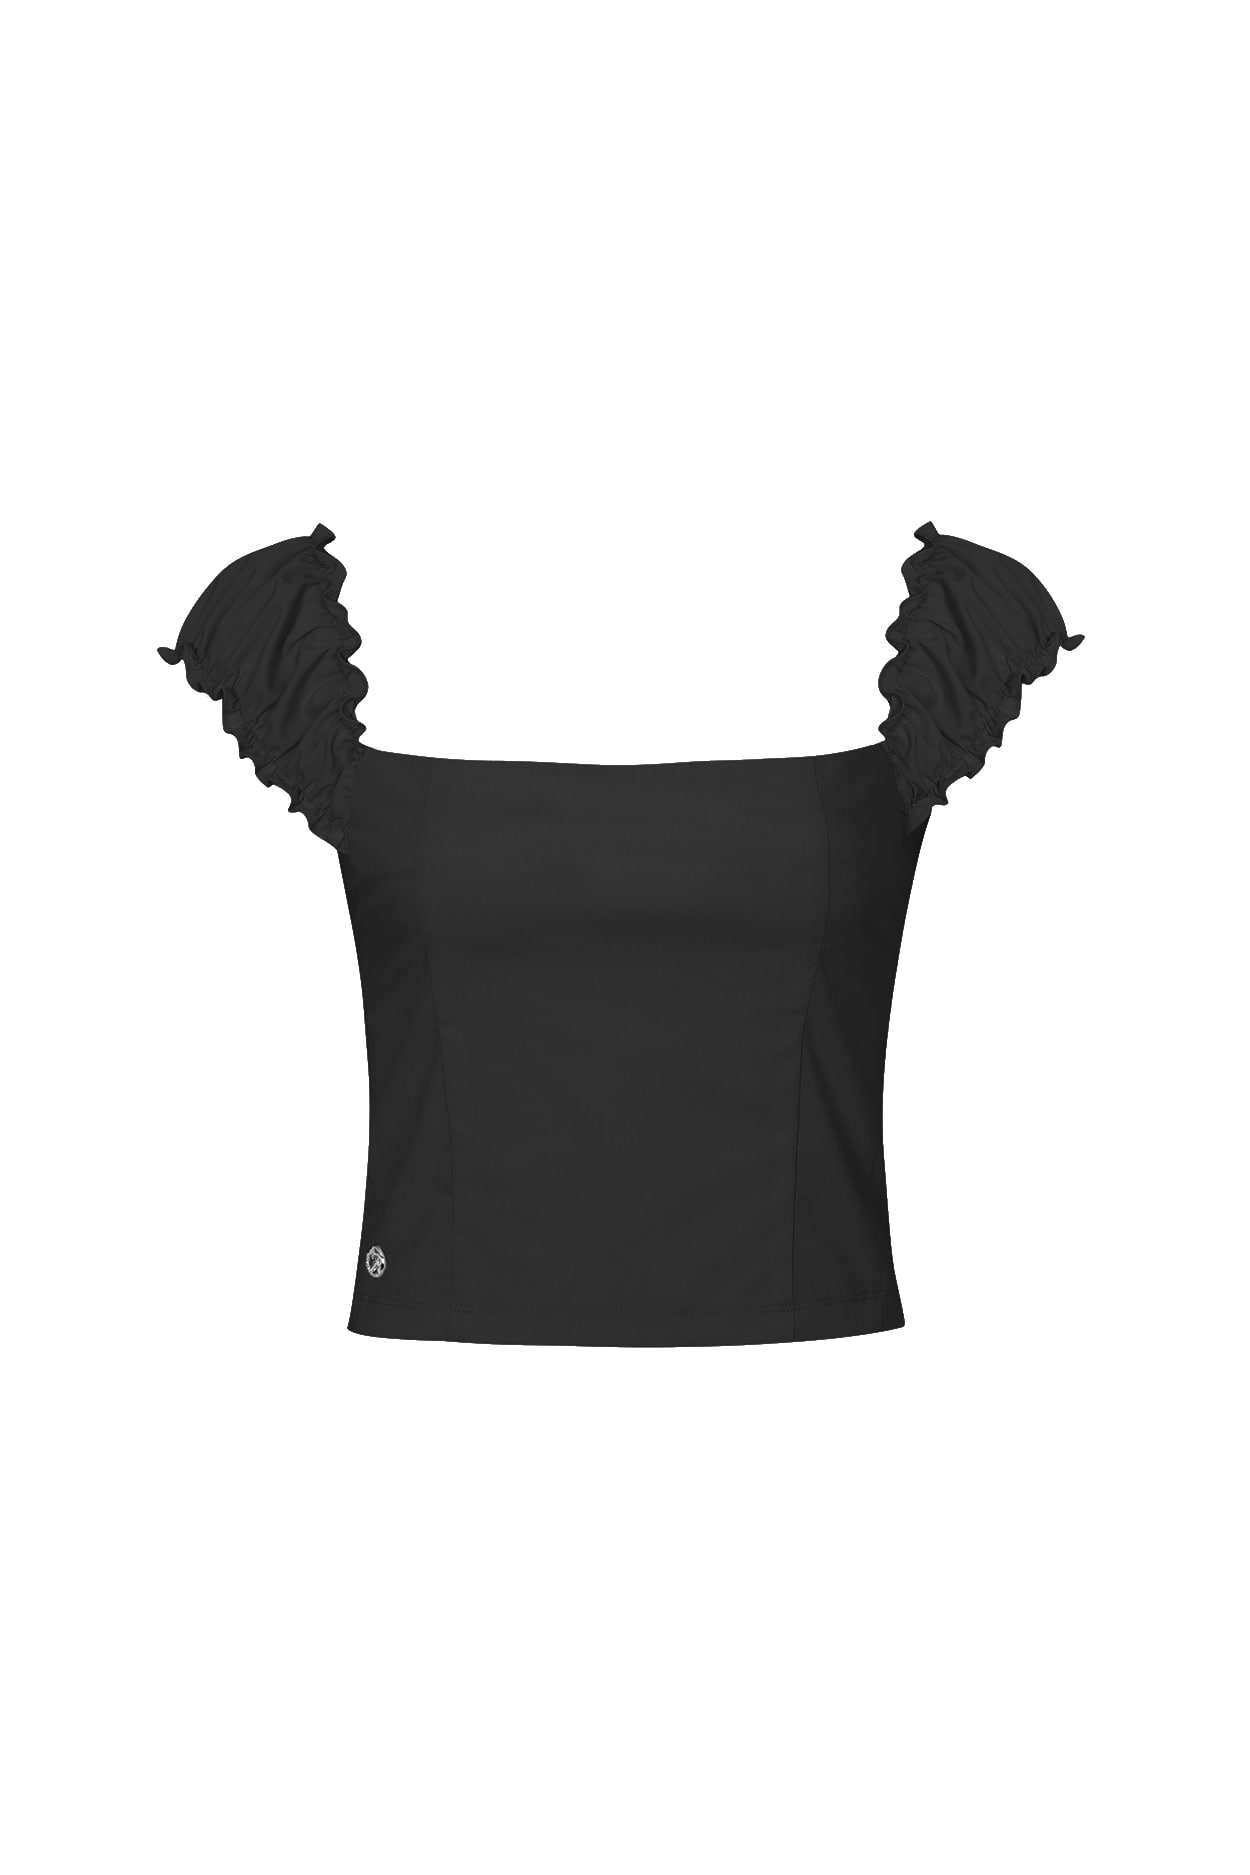 BRITNEY TOP charcoal